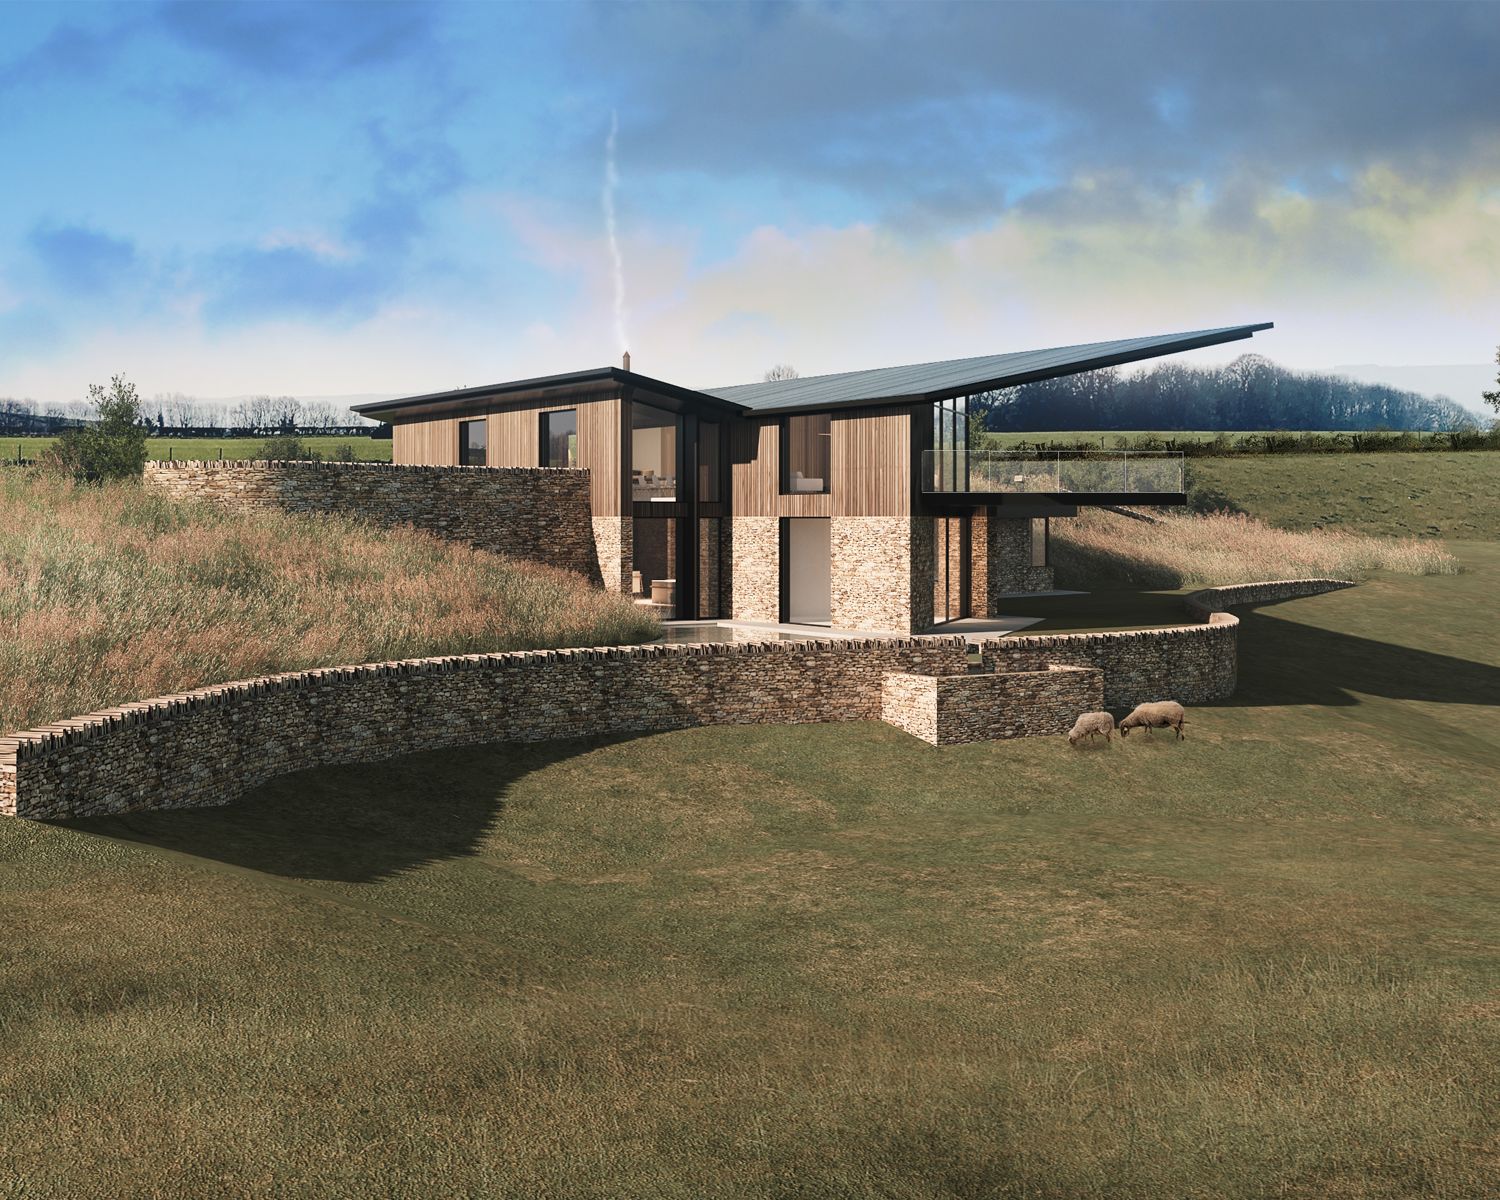 Drawing of a New Home in the Country for a planning application